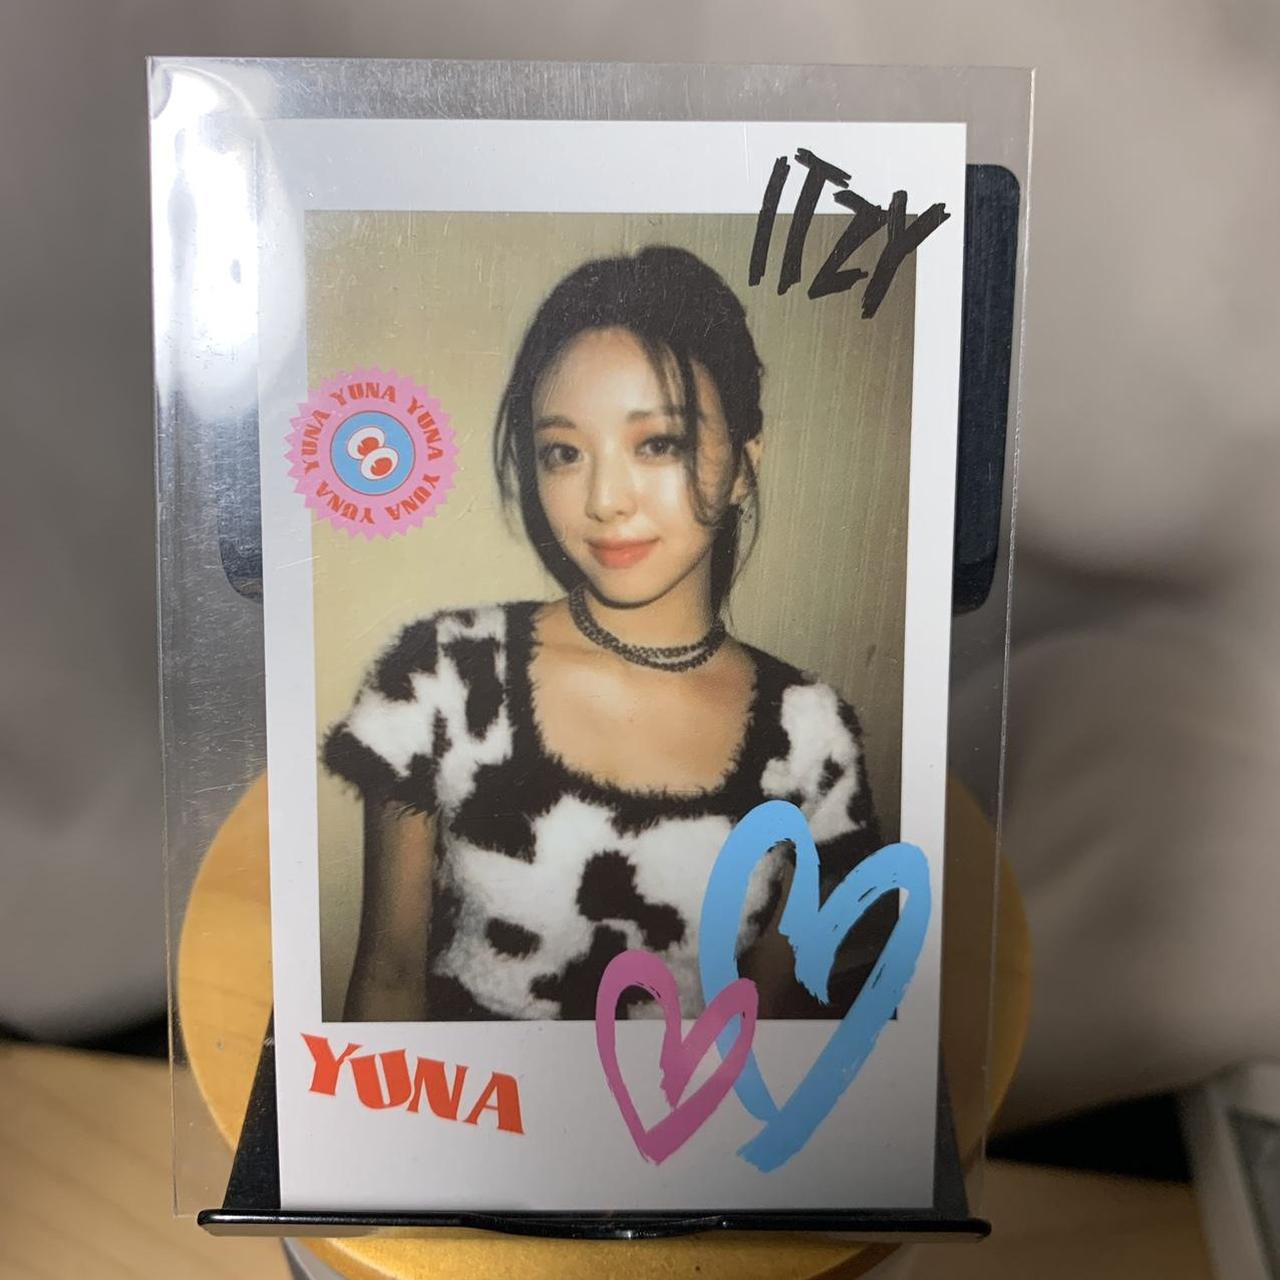 WTS Itzy Crazy In Love YUNA APPLE MUSIC Photocard US